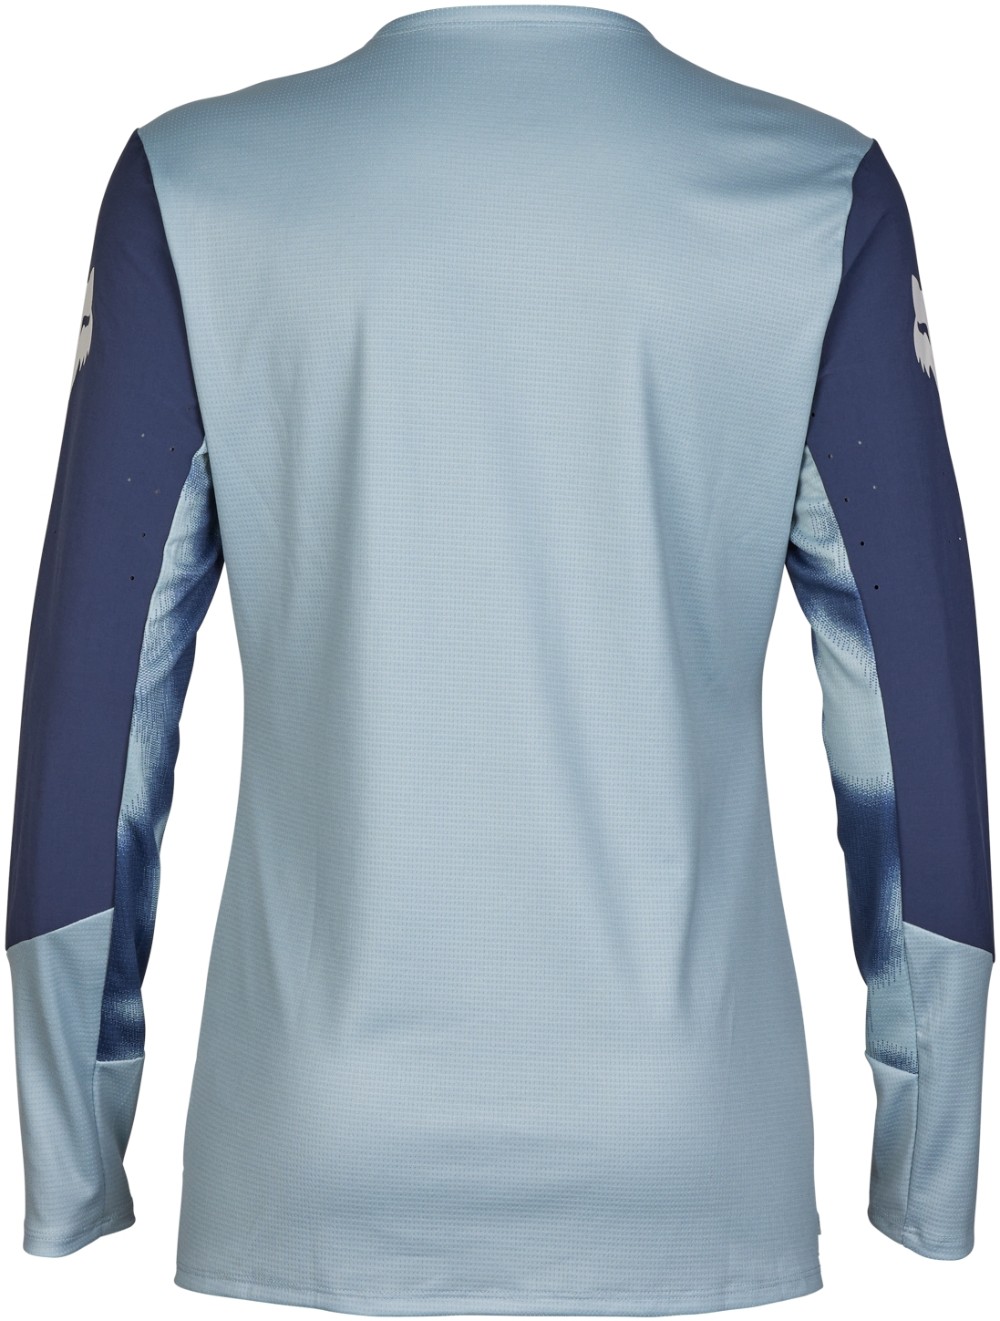 Defend Womens Long Sleeve MTB Jersey Taunt image 1